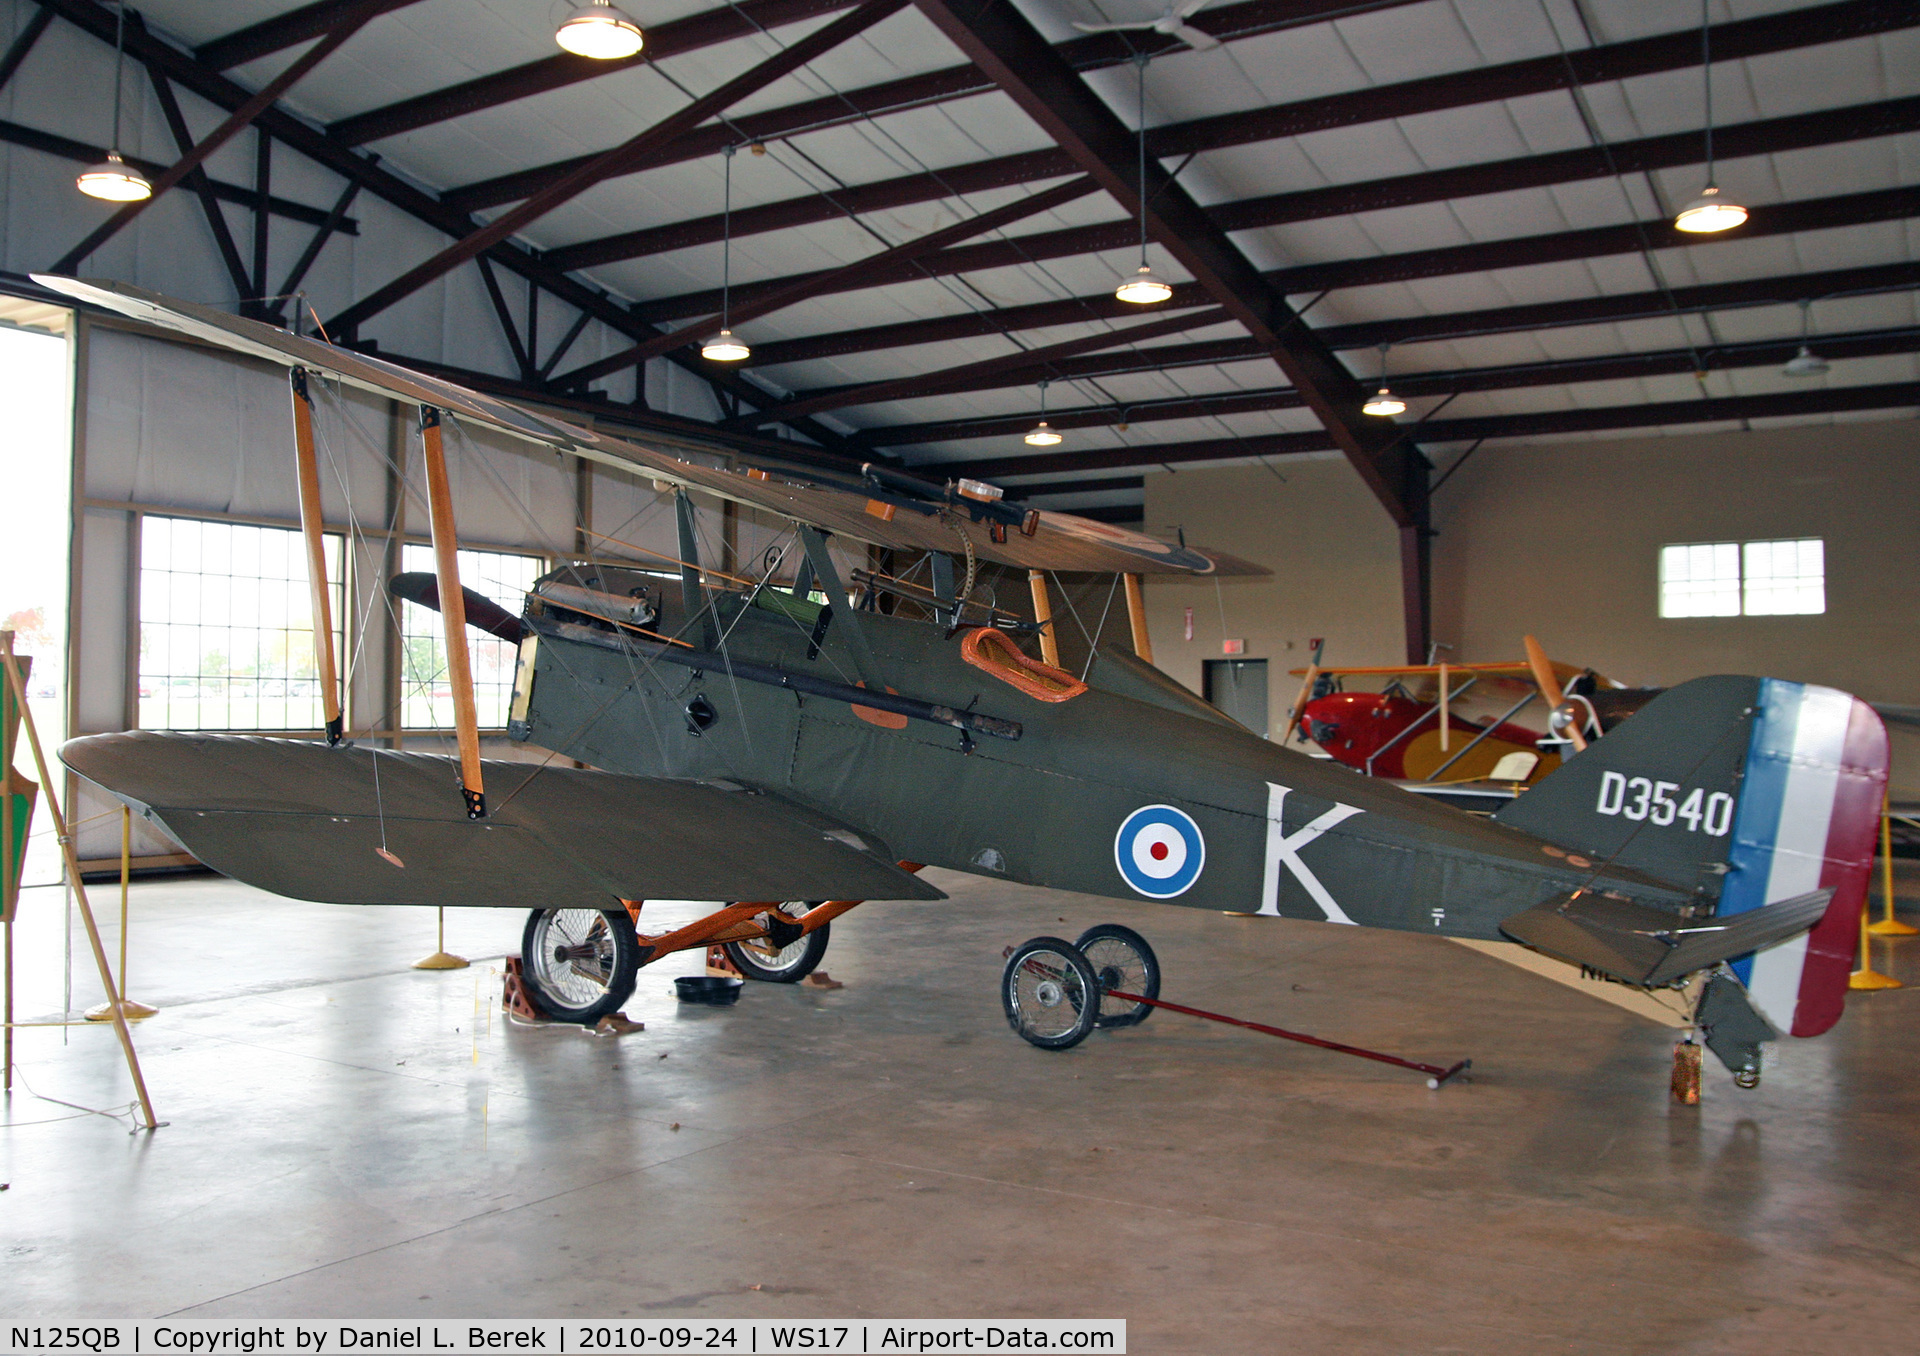 N125QB, Royal Aircraft Factory SE-5A Replica C/N D3540, Nice running into this fine replica of one of my favorite World War I aircraft!